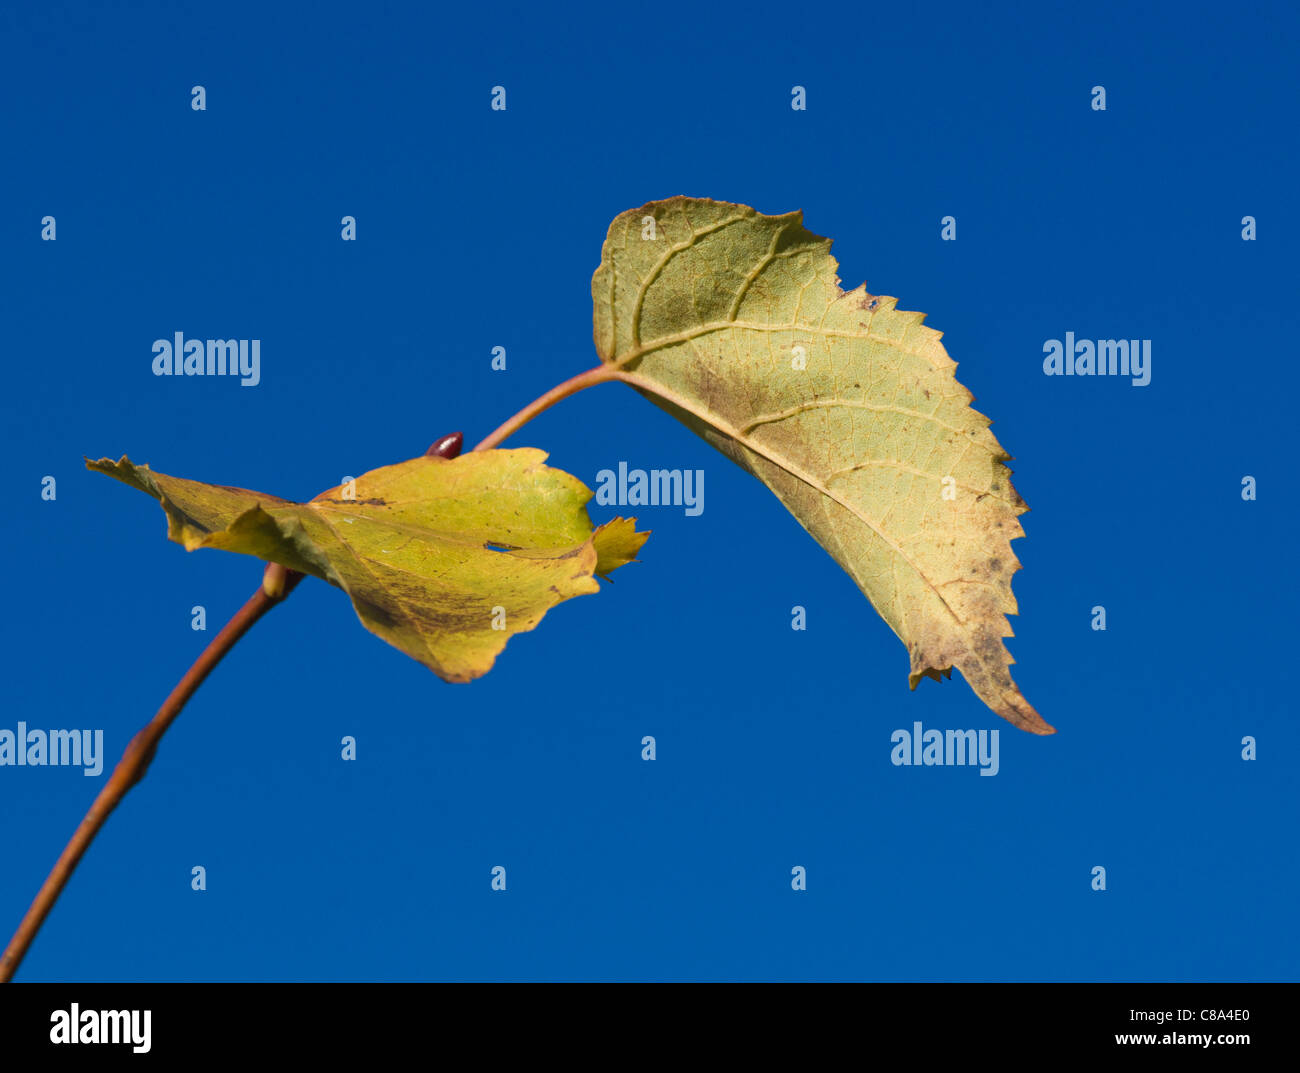 The twig with two yellow leaves against a deep blue sky Stock Photo